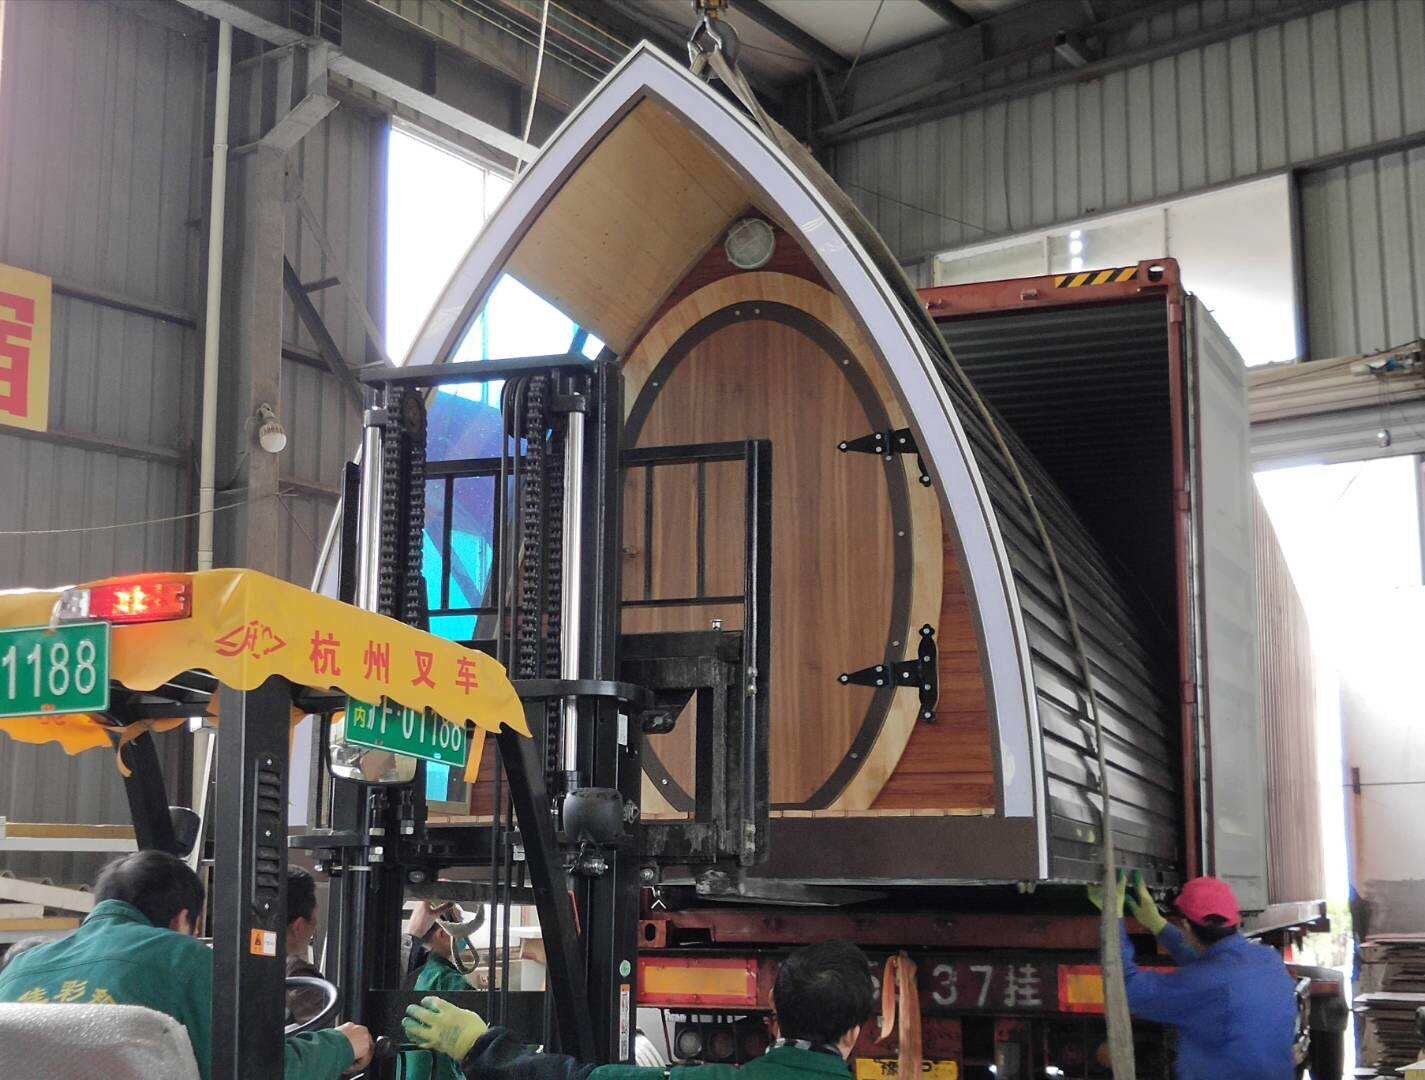 arched roof container company, arched roof container exporter, beach cabin container oem, beach cabin container odm, beach cabin container customize